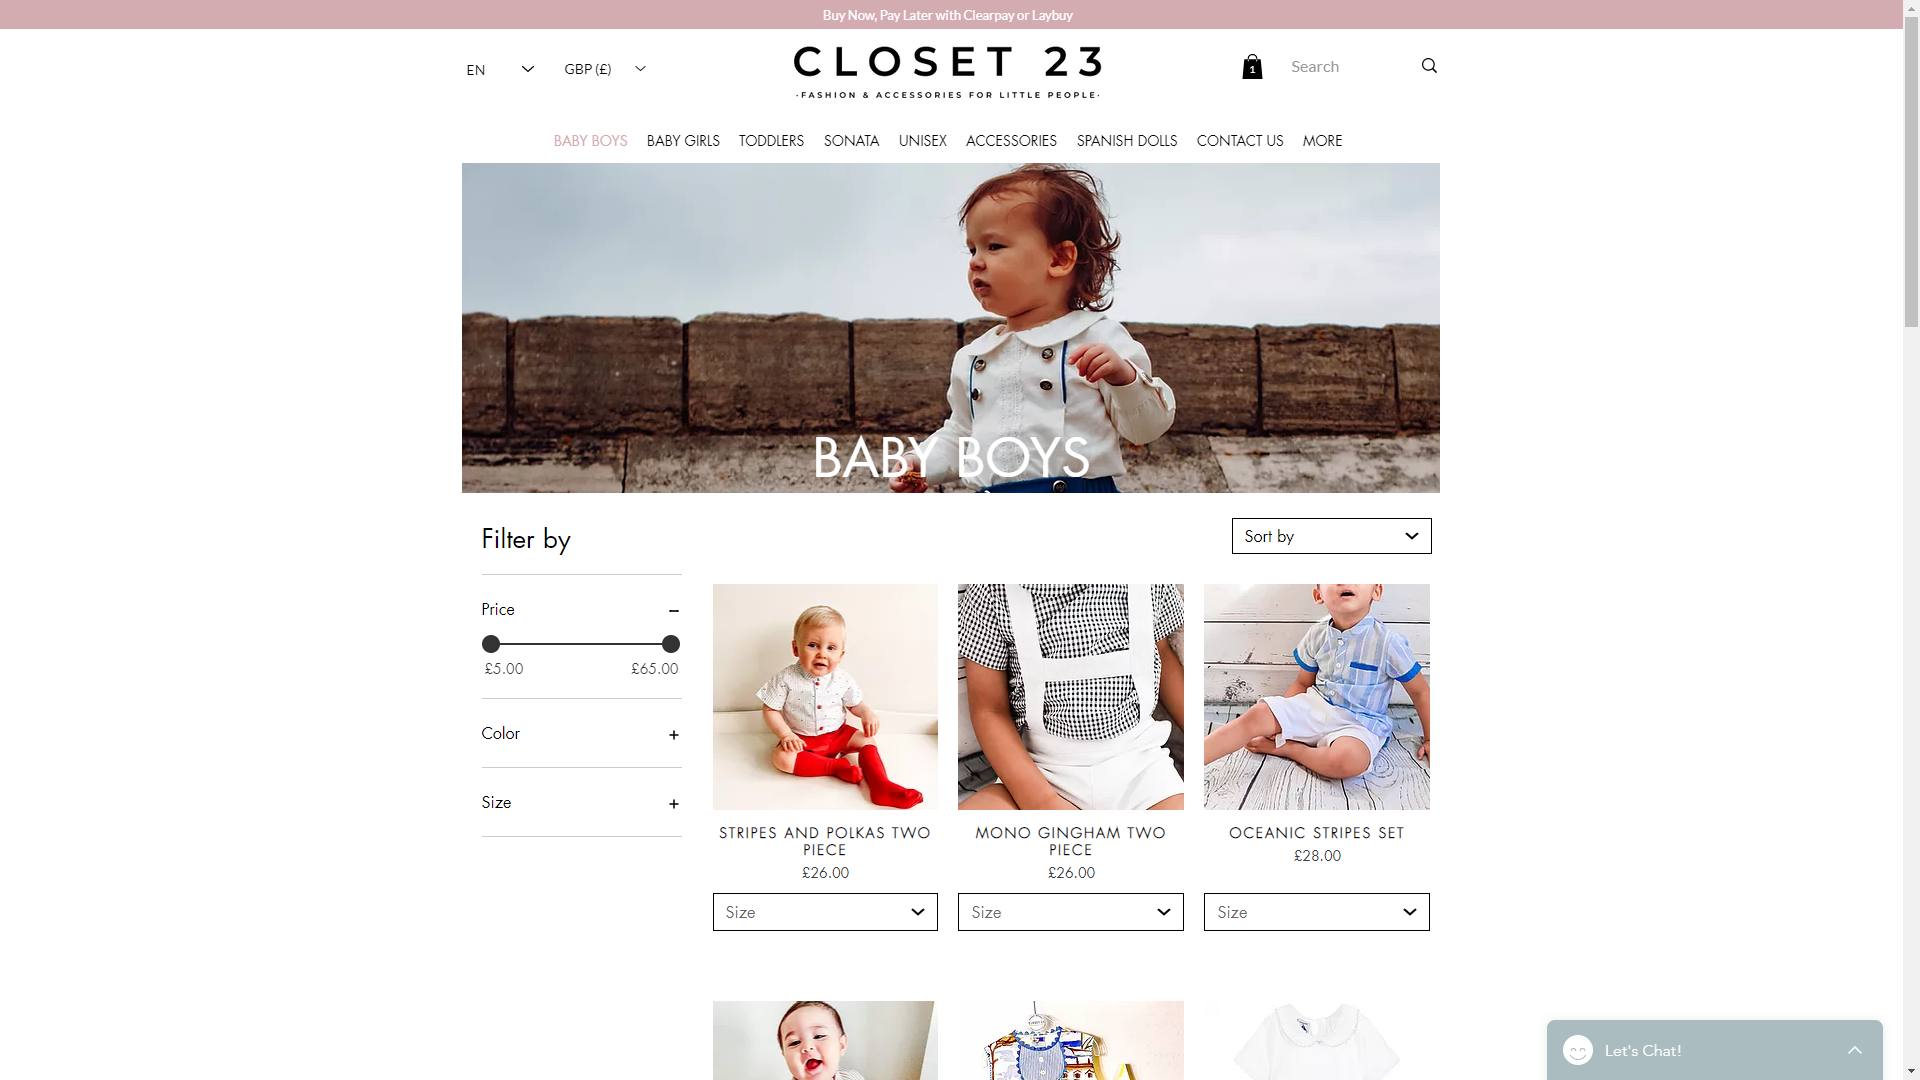 the boys page of a clothing site